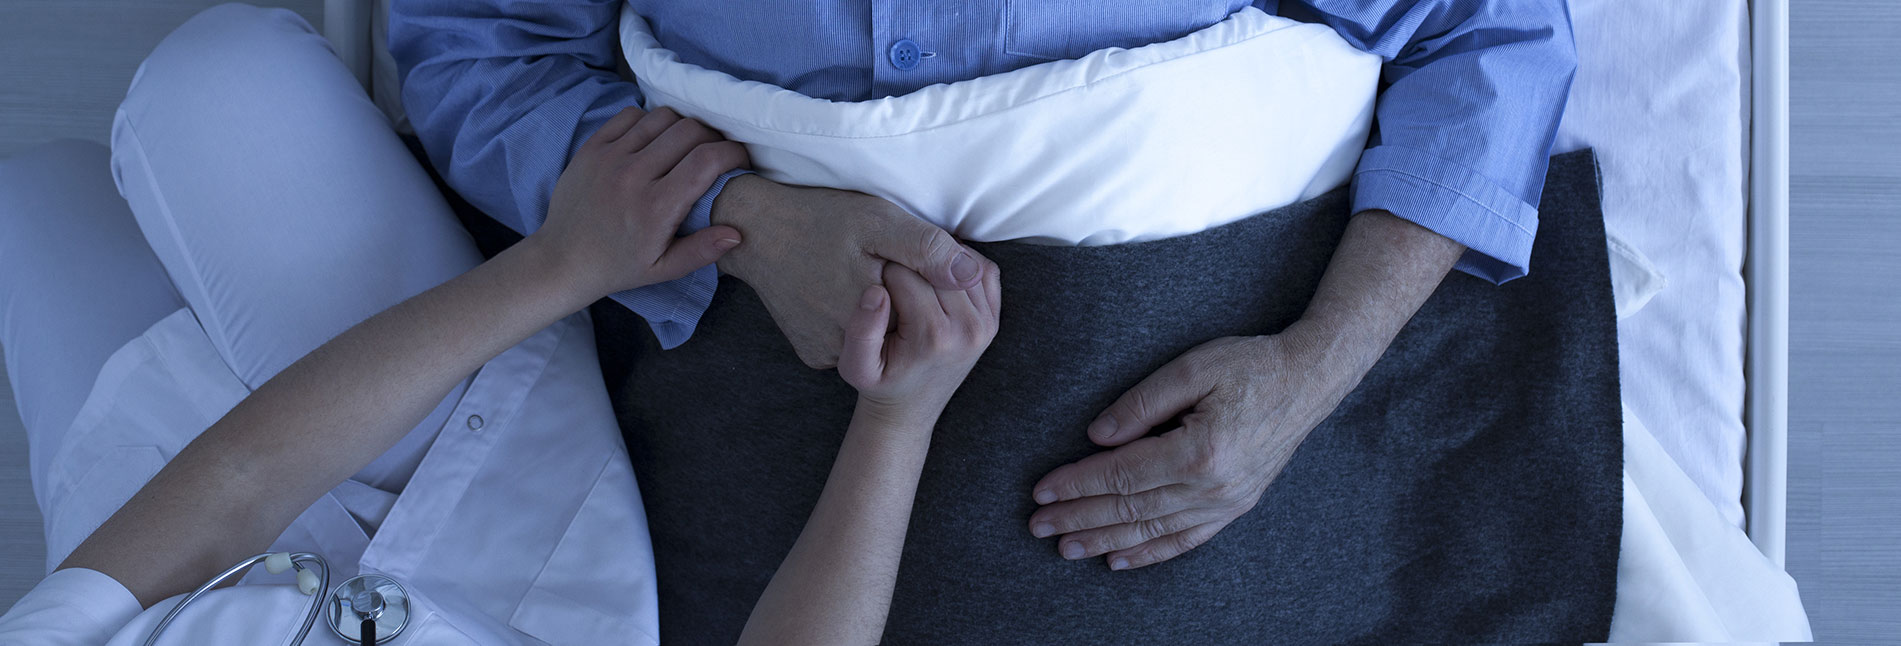 When Should I Put My Parents in Hospice?